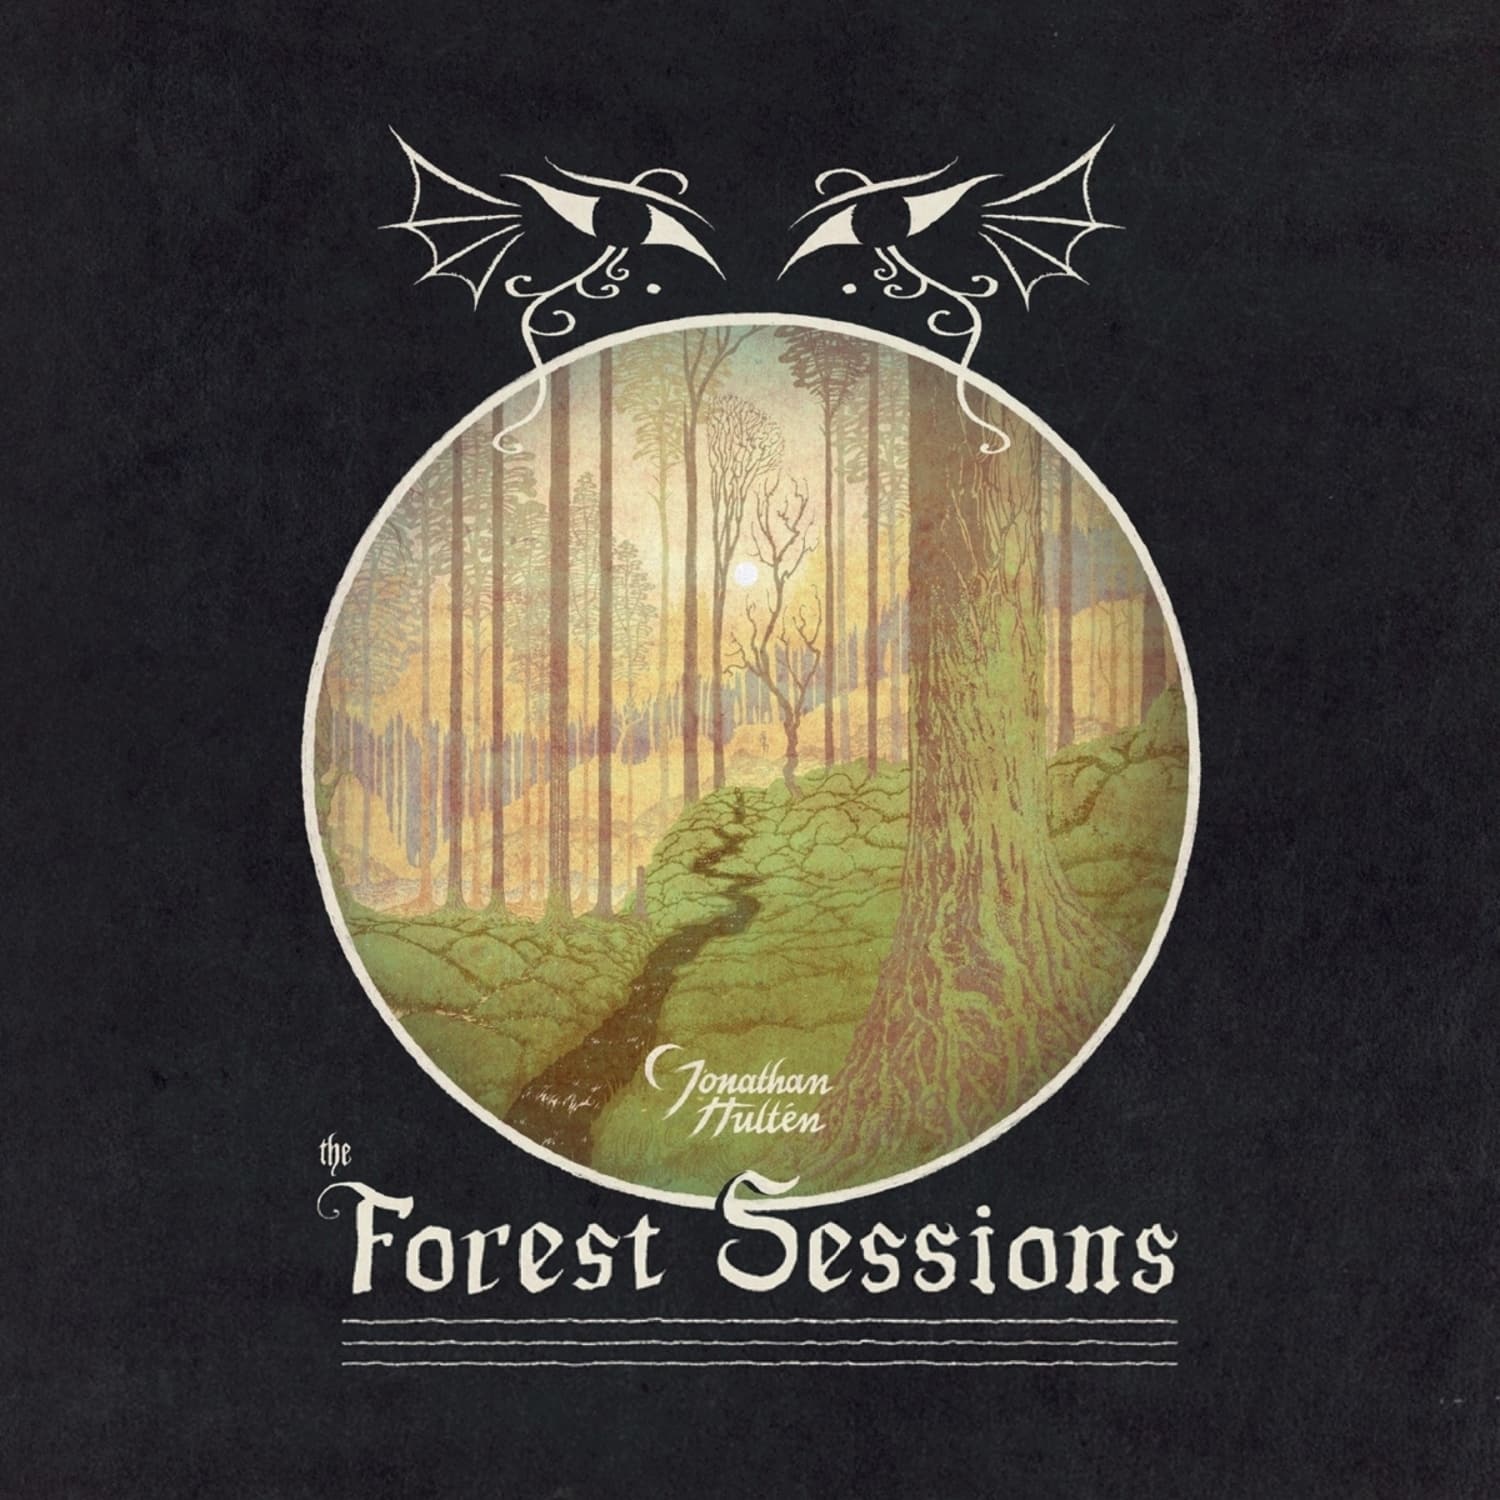  Jonathan Hulten - THE FOREST SESSIONS 